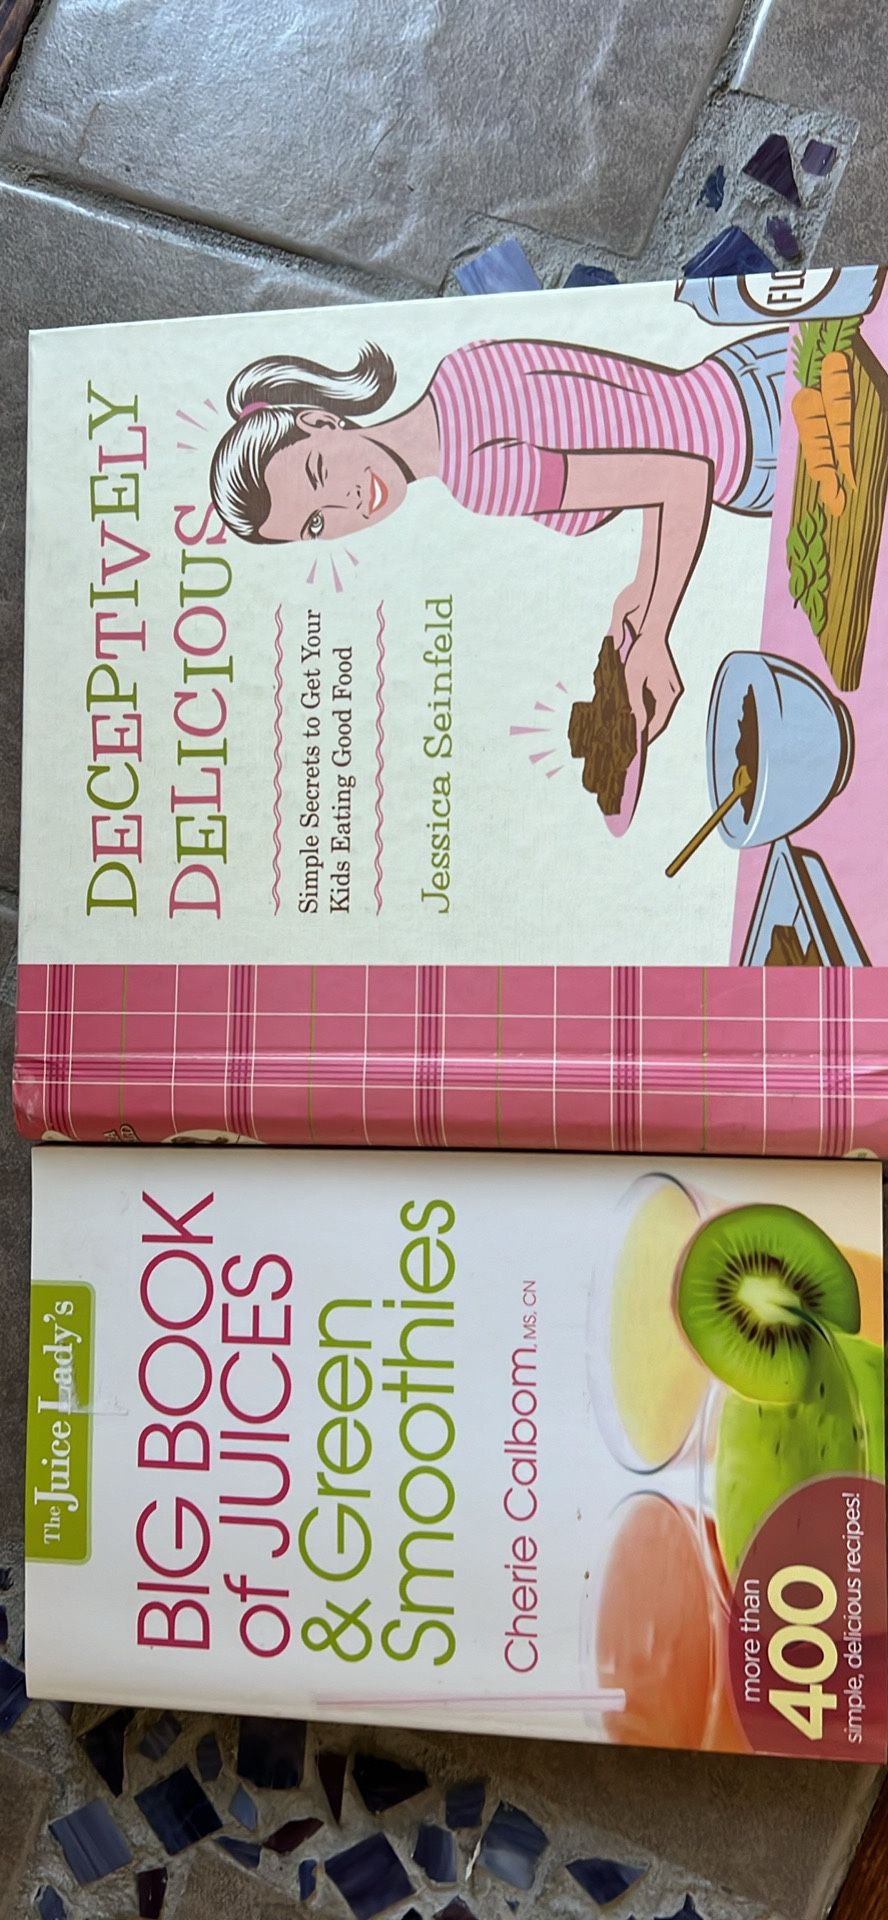 Great Cook Books! 